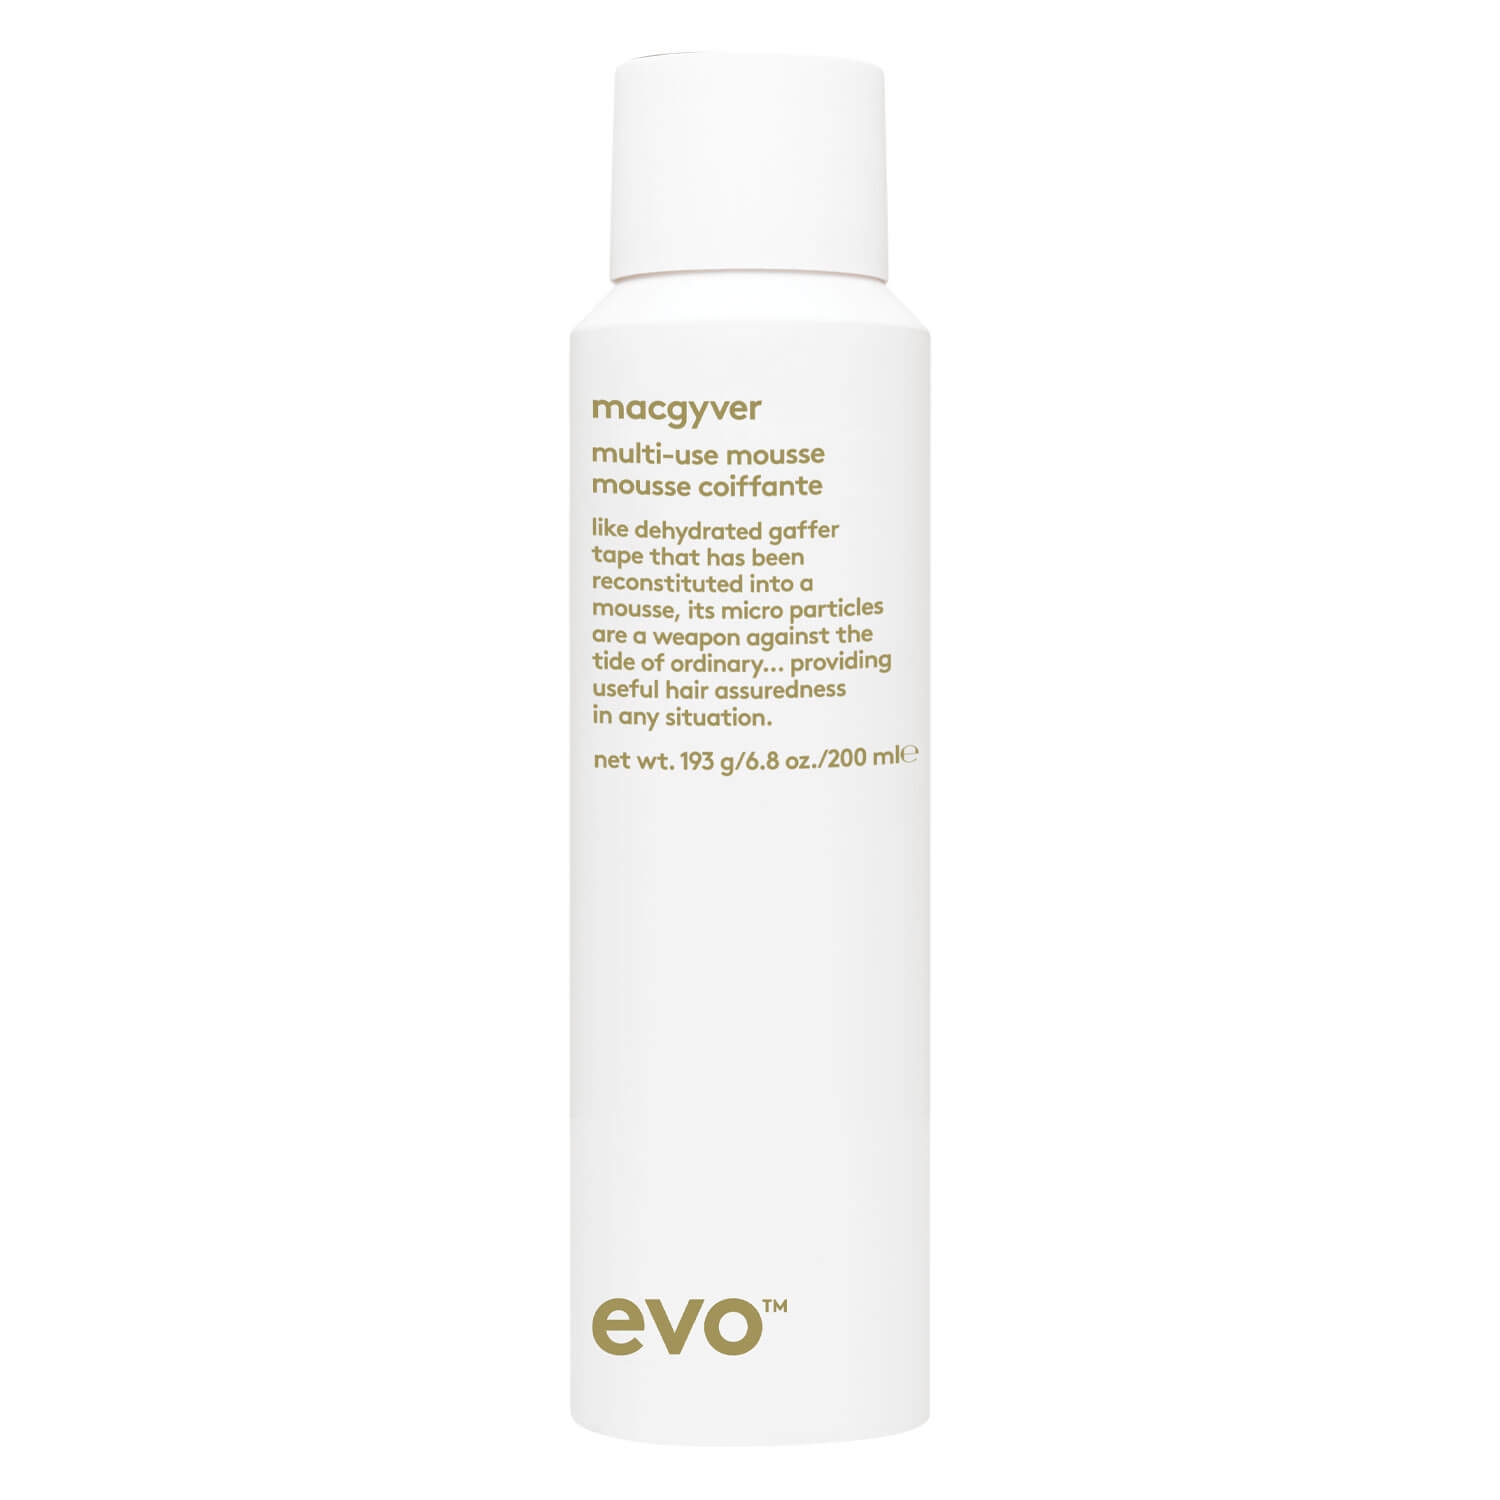 Product image from evo style - macgyver multi-use mousse